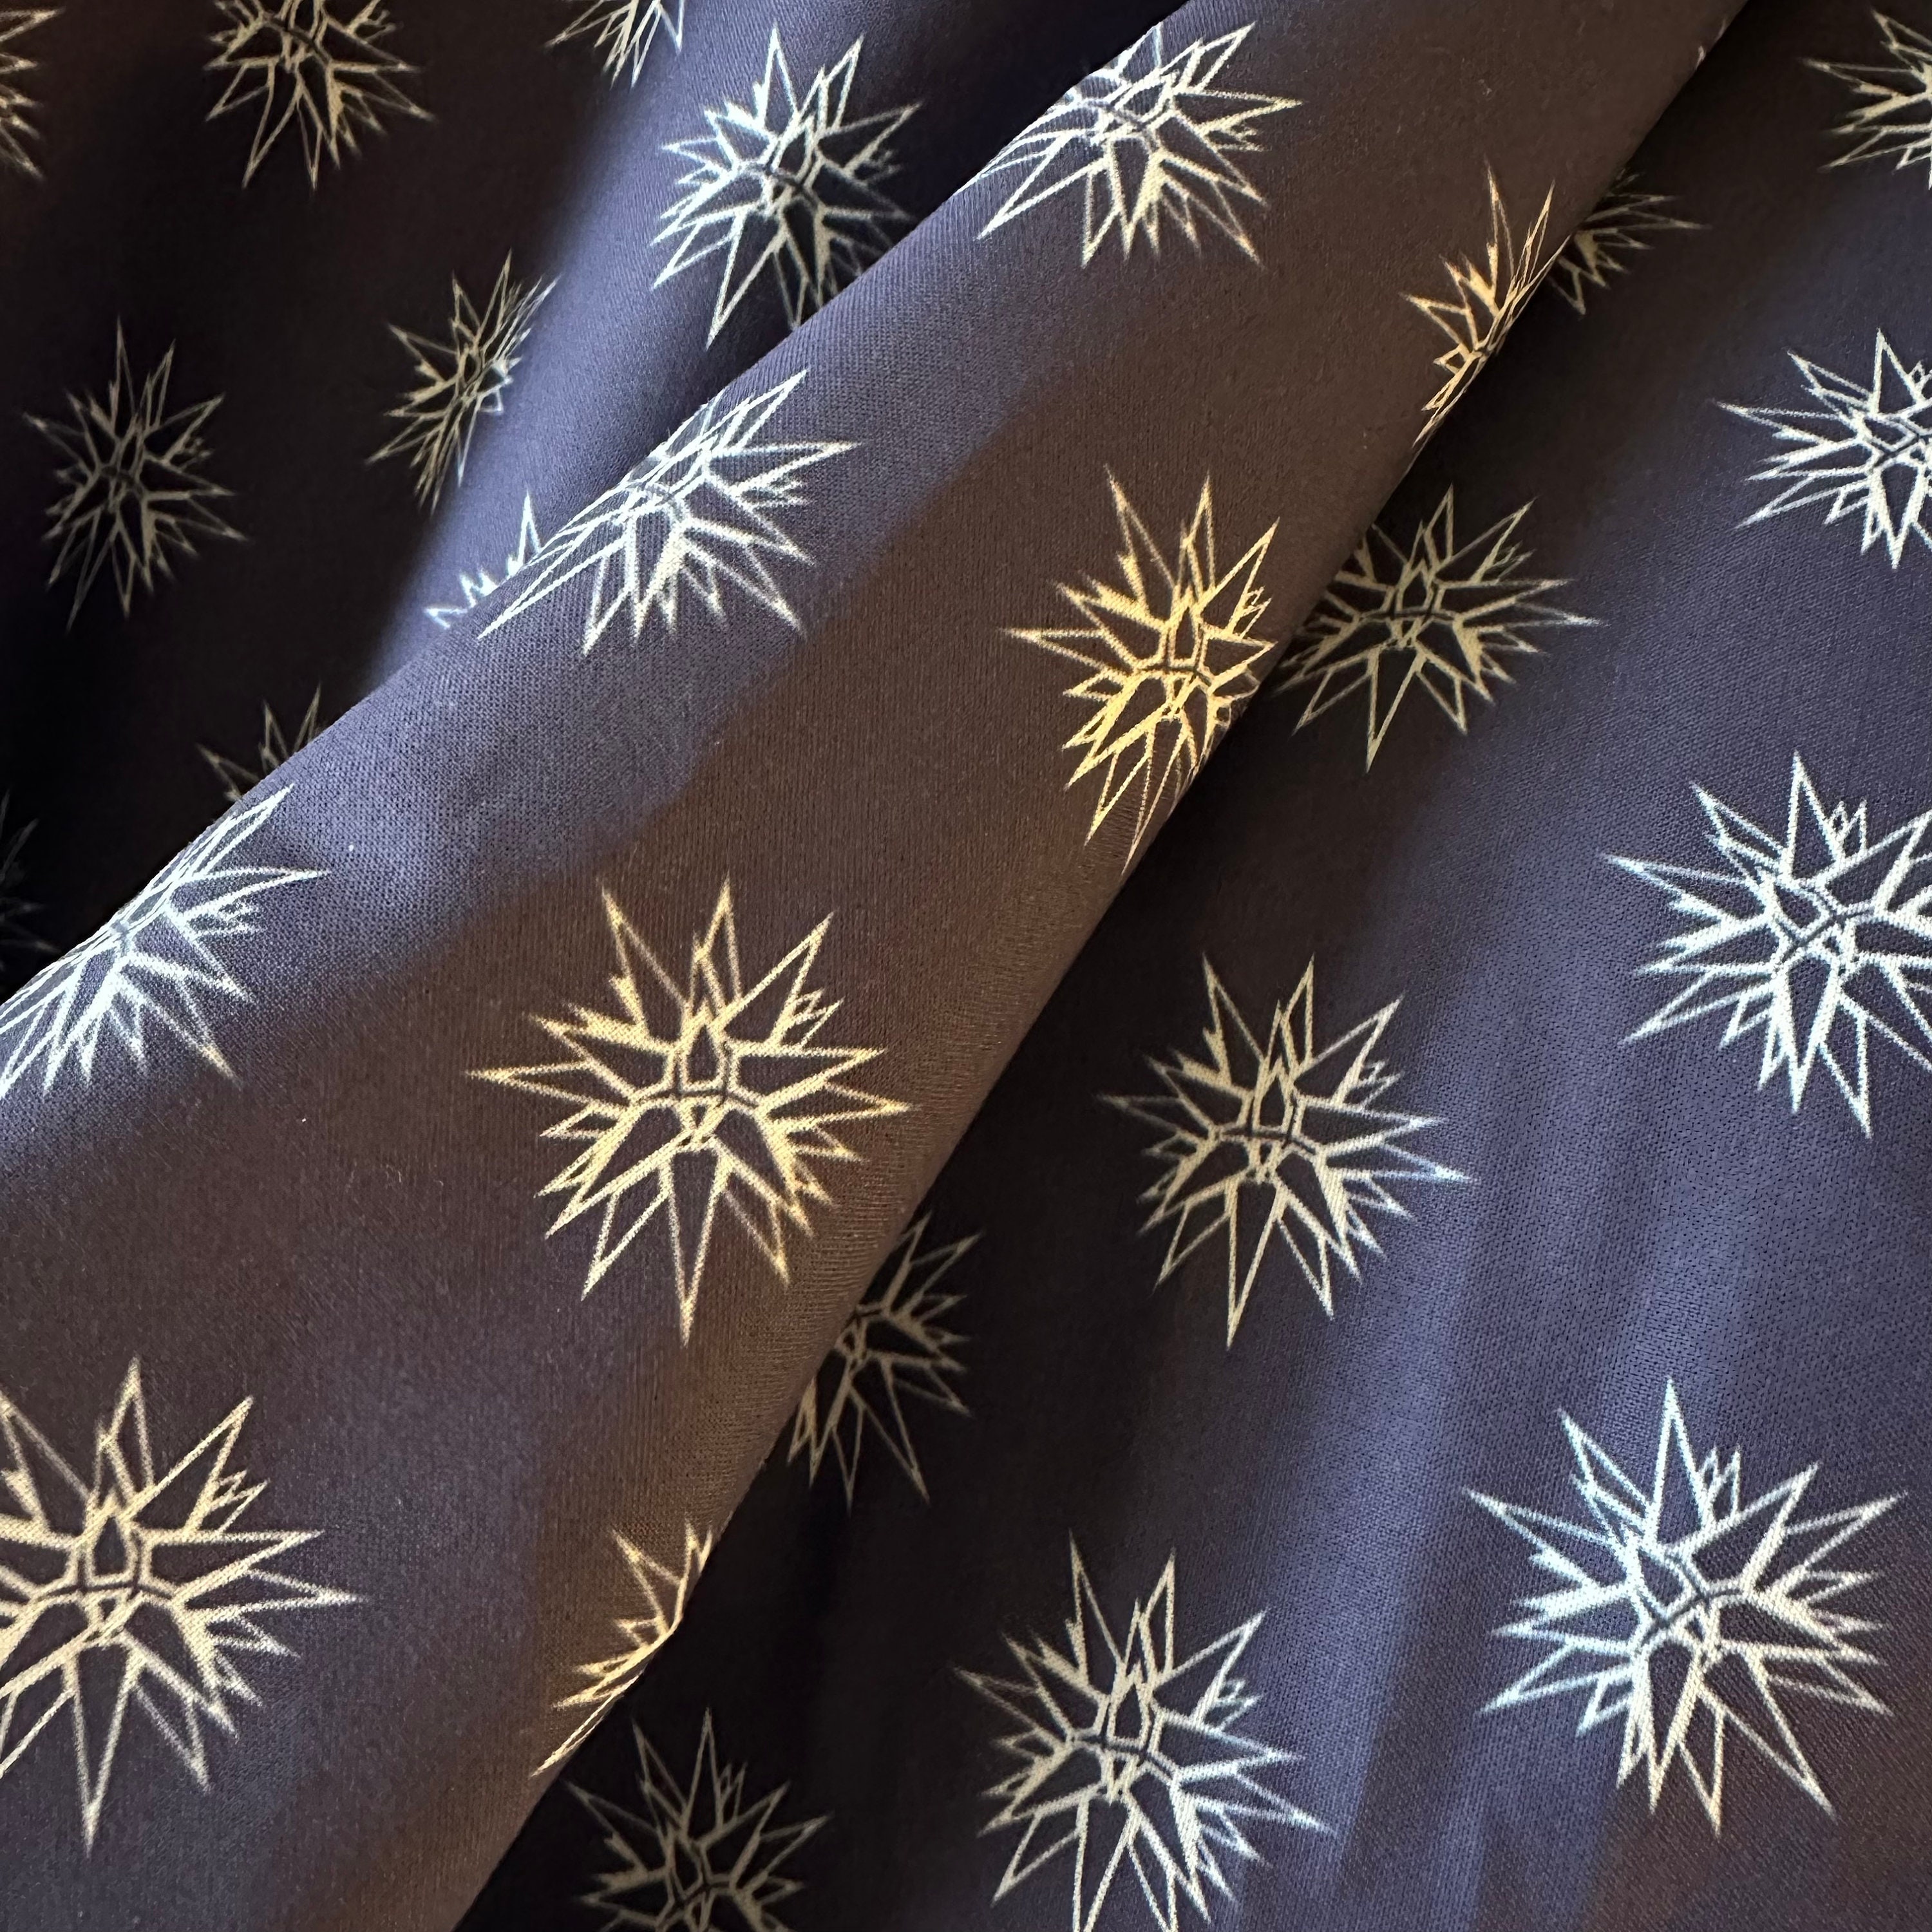 Moravian Star Fabric, Wallpaper and Home Decor